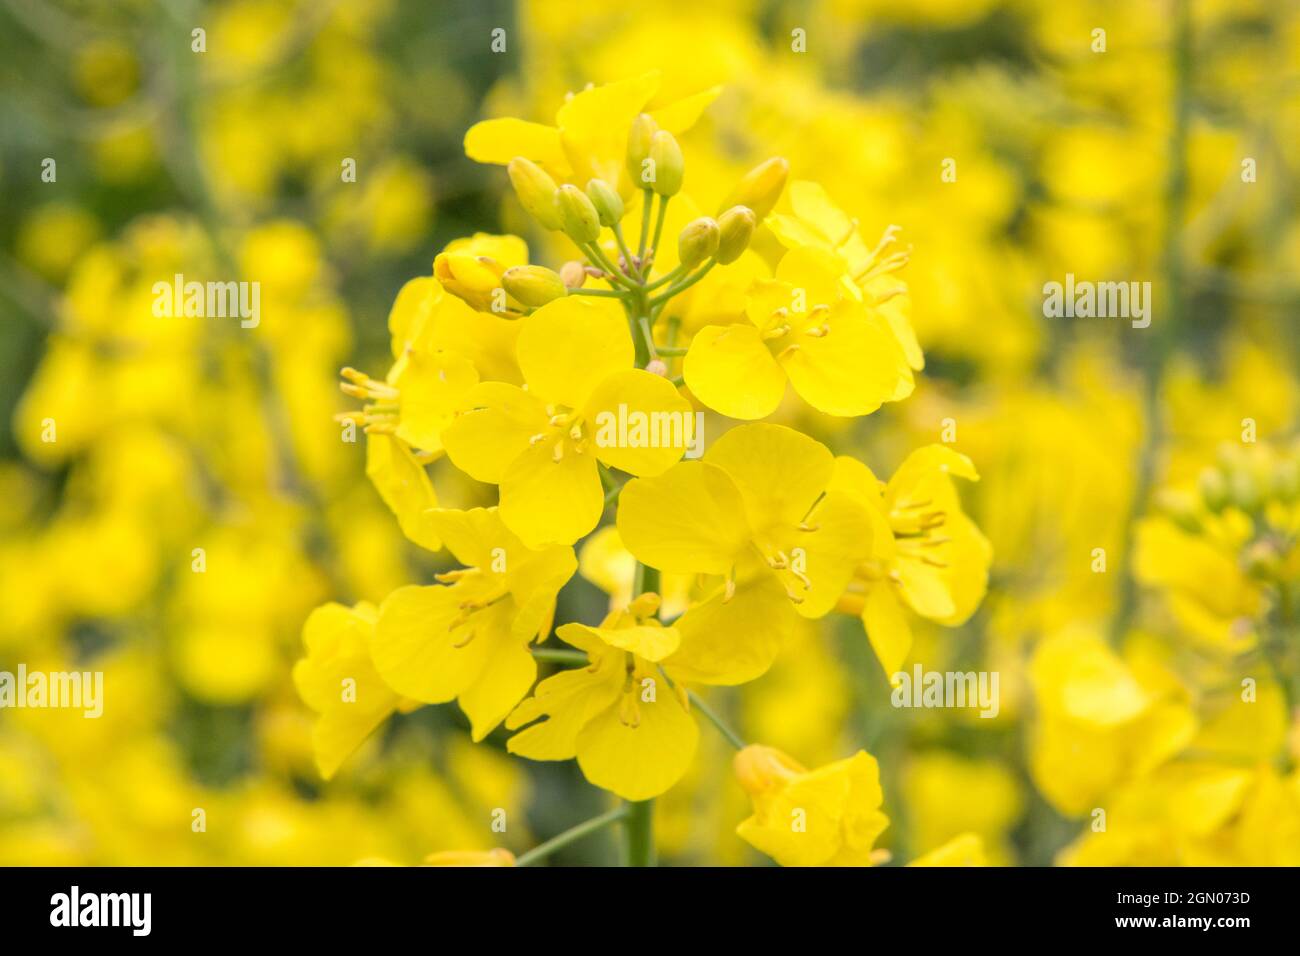 Field of flowering Oilseed Rape, Canola / Brassica napus variety in cultivation in UK. Stock Photo